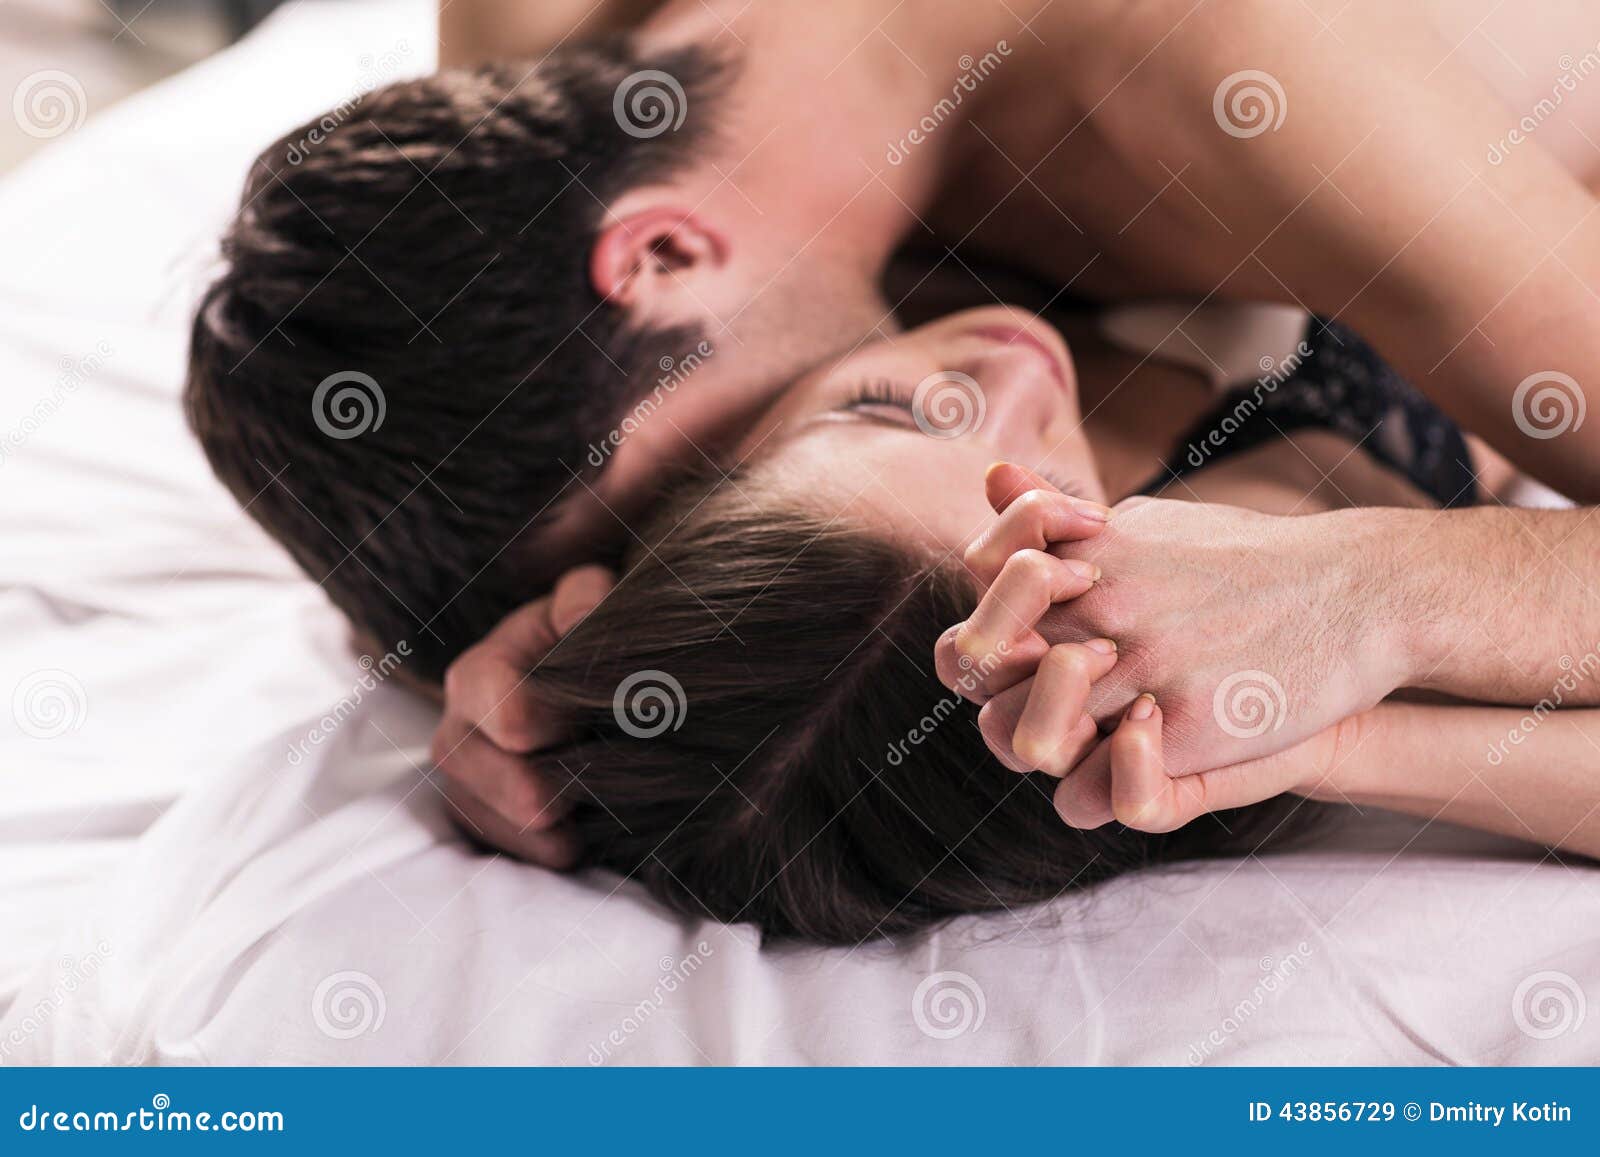 Young lovers kiss stock image. Image of elegance, indoor - 43856729